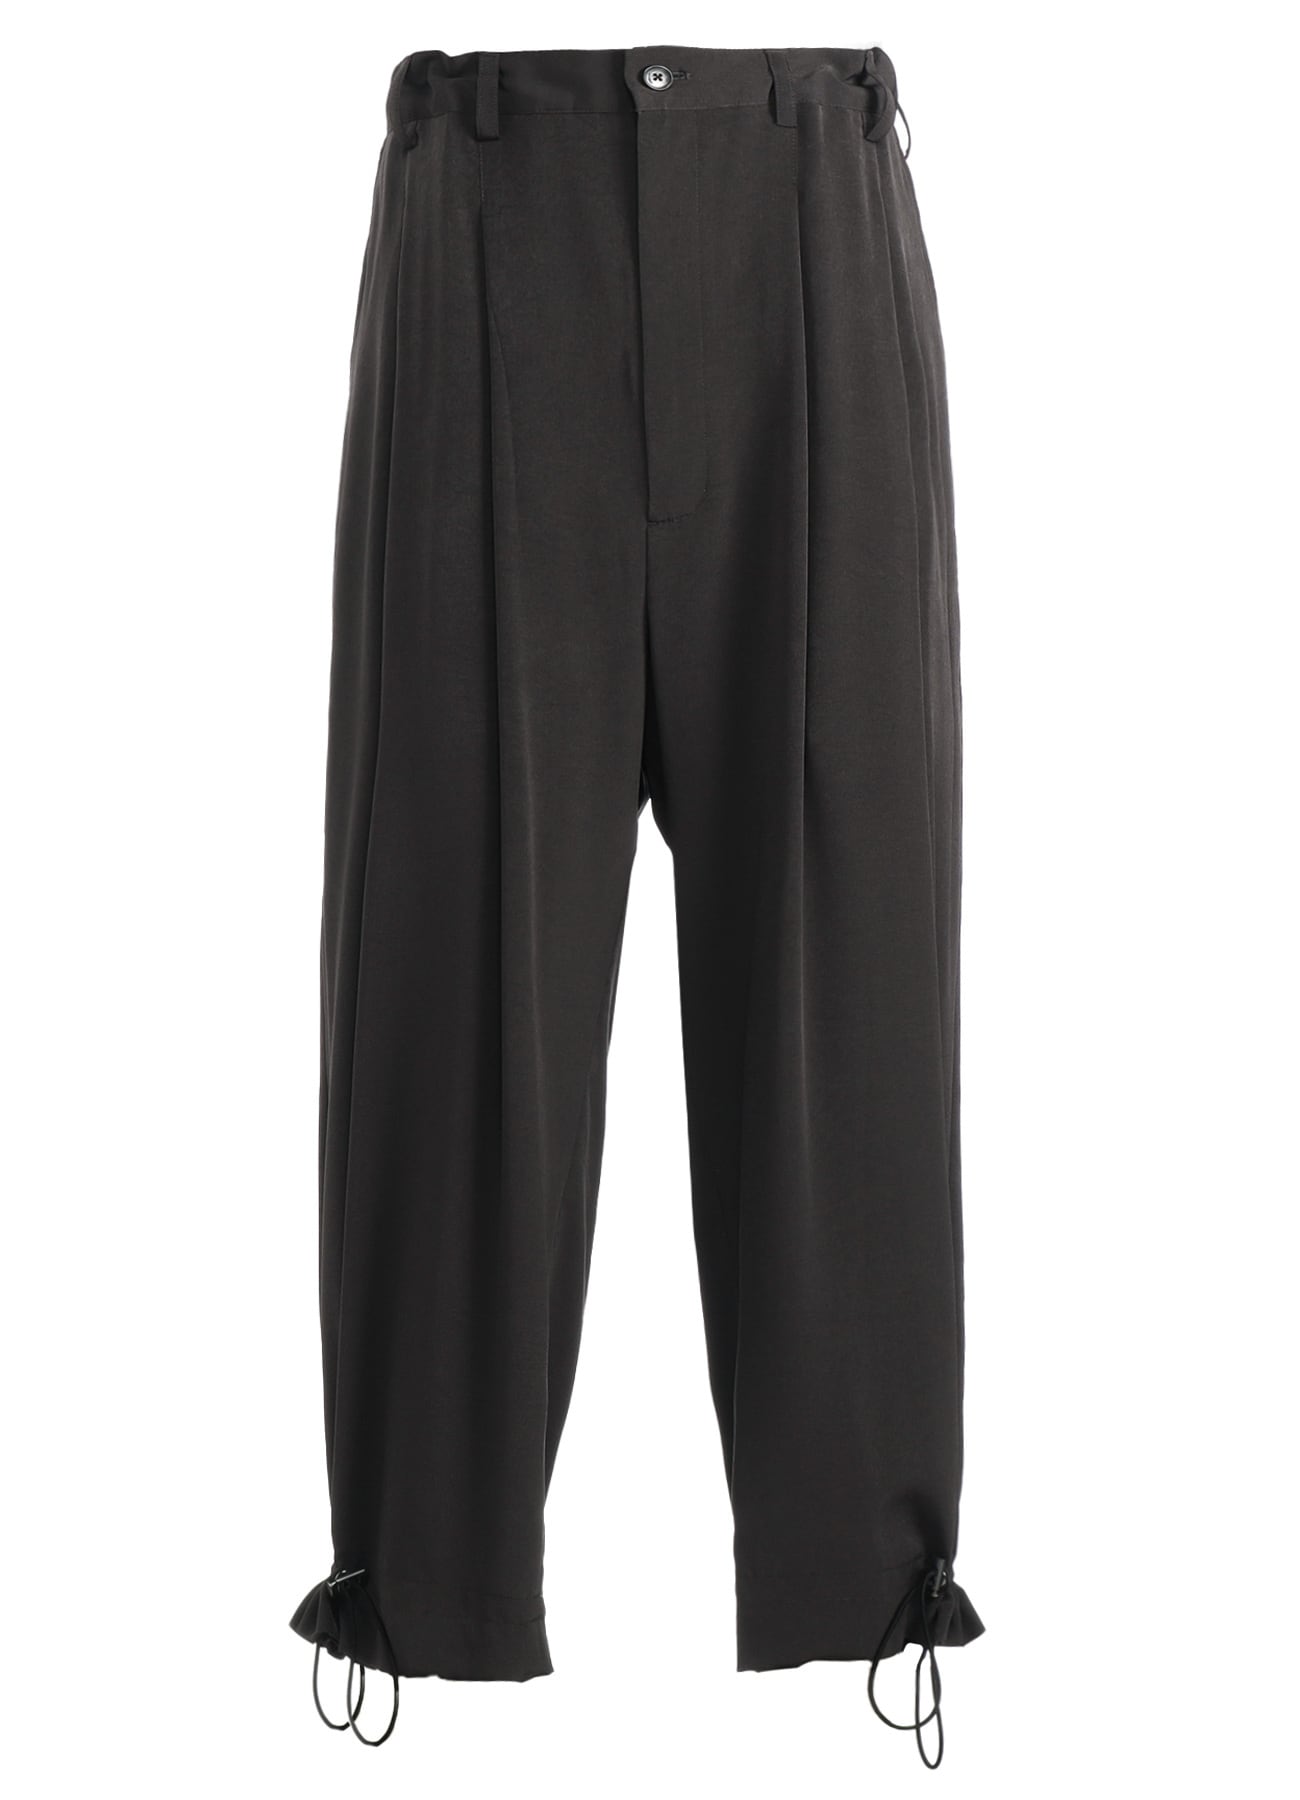 TRIACETATE/POLYESTER CREPE de CHINE TWO TUCK DRAWCORD PANTS(FREE 